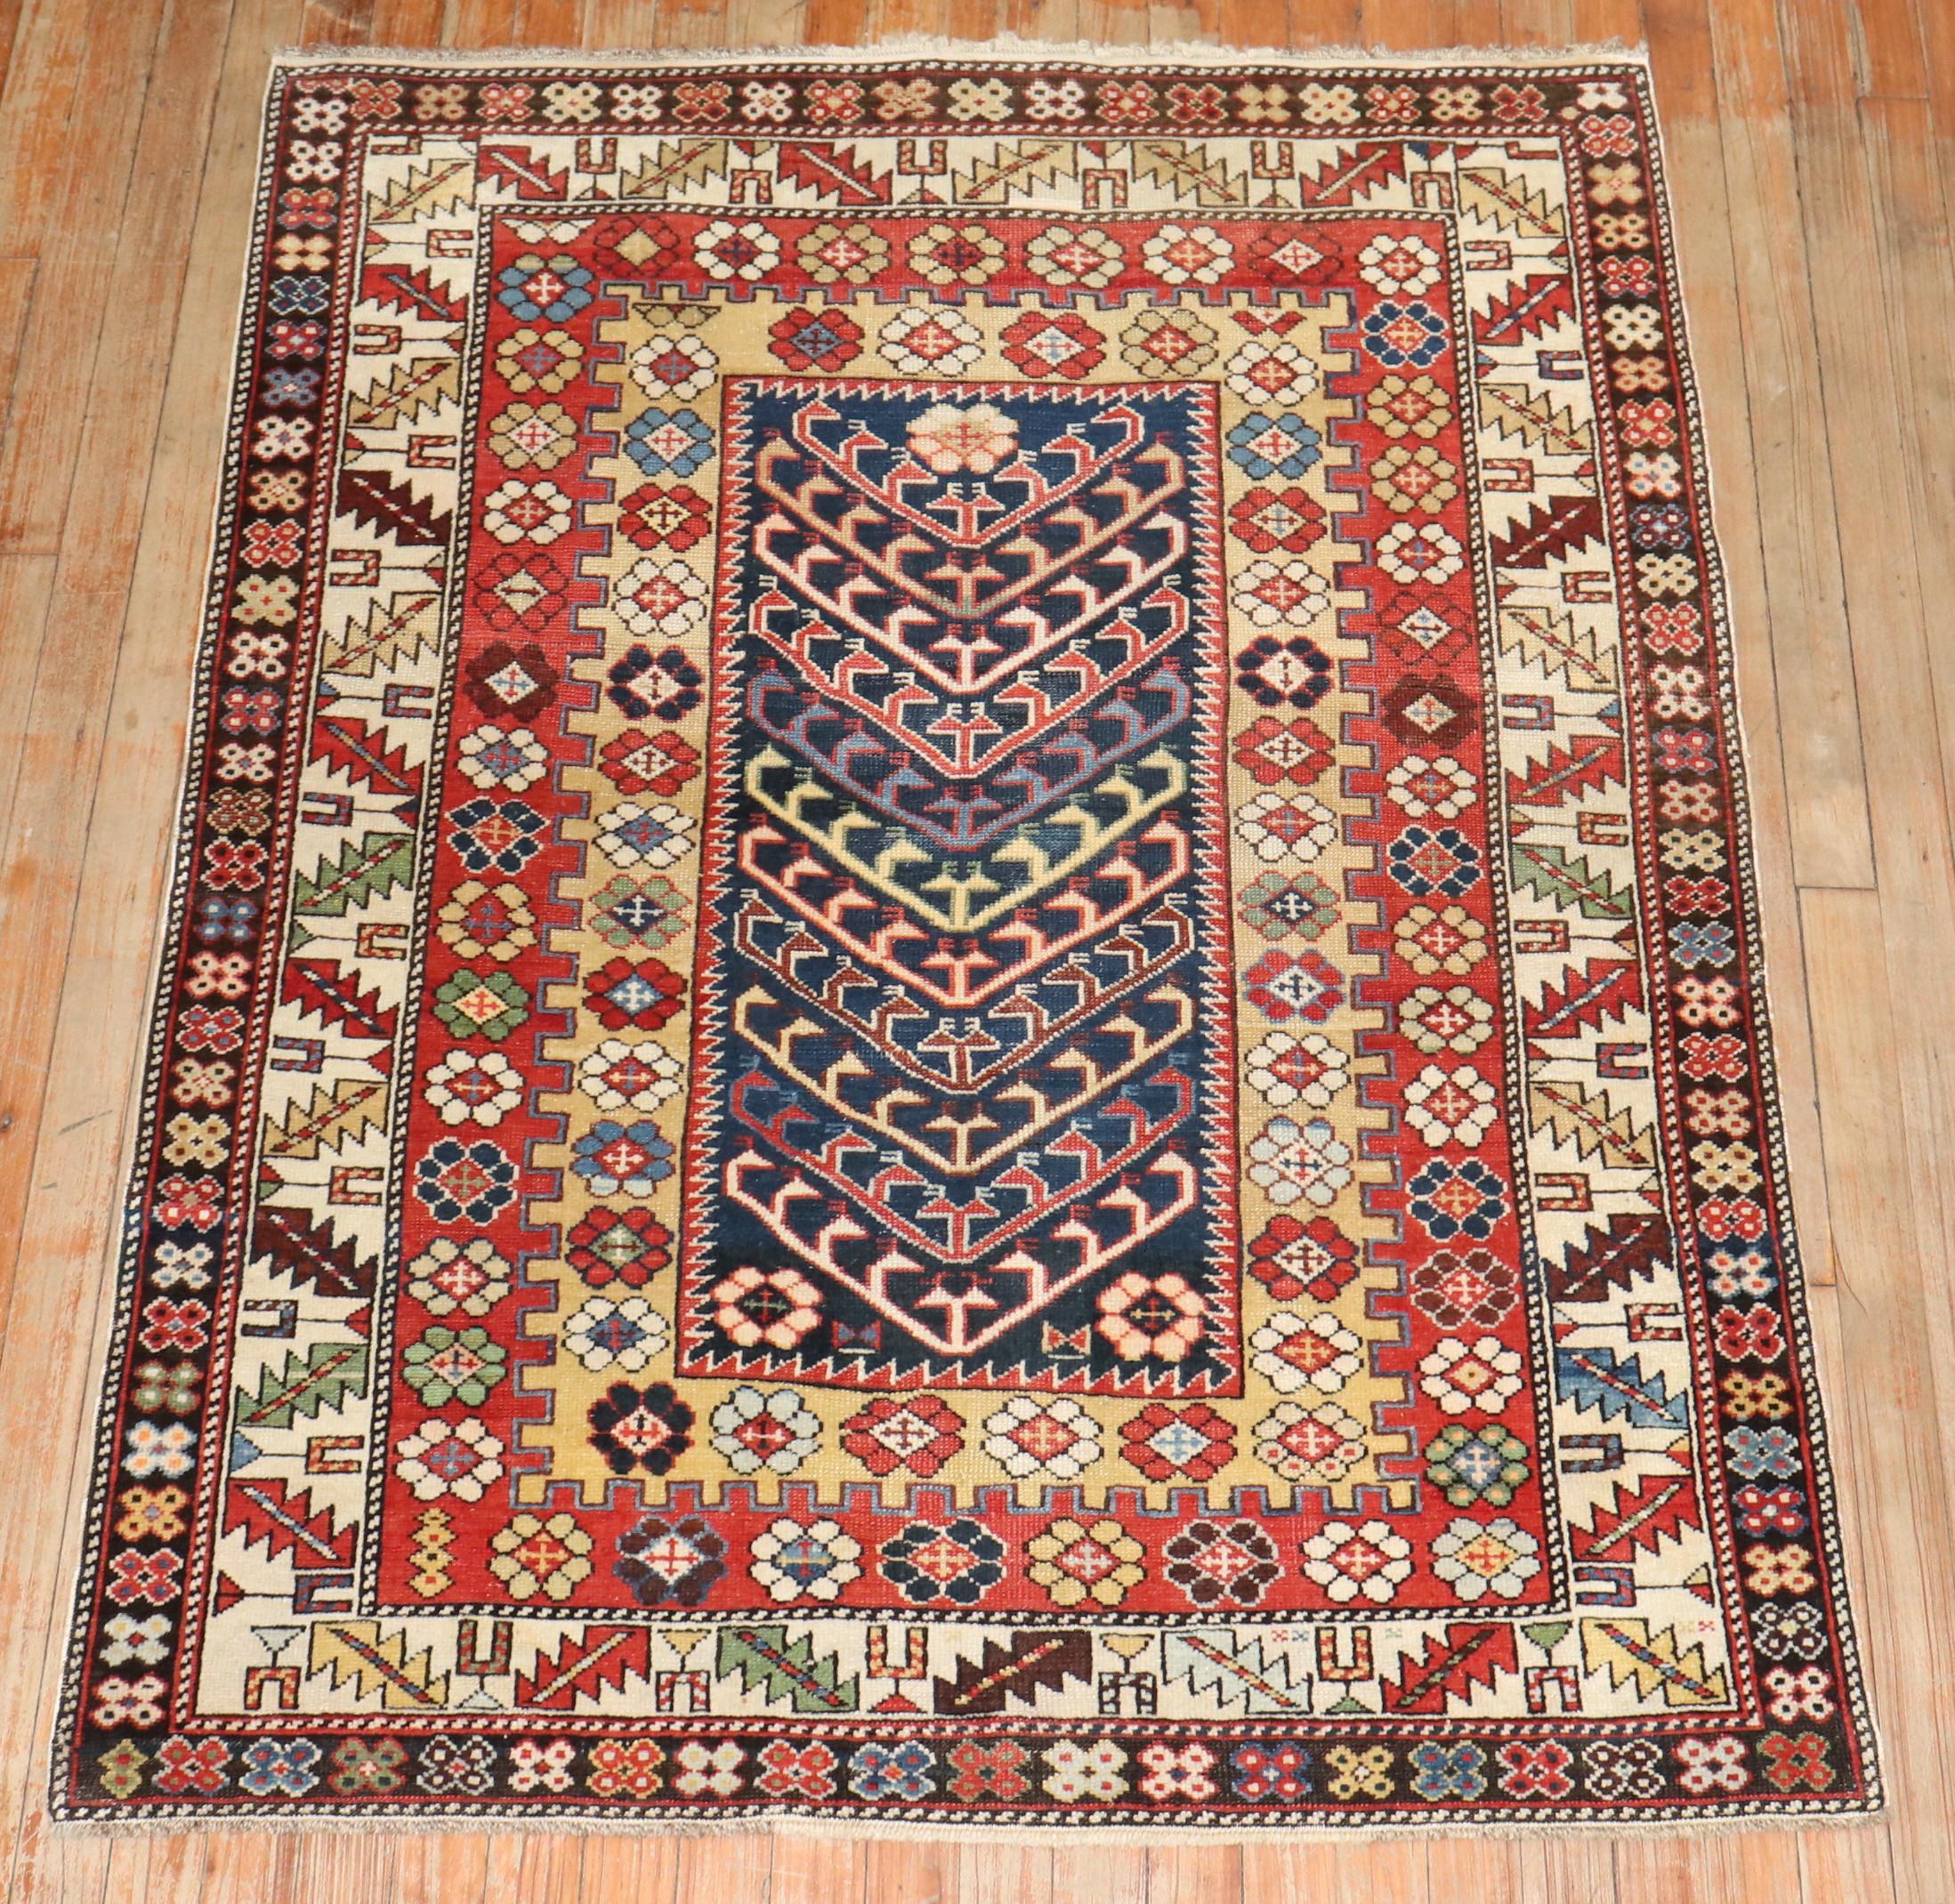 An early 20th century colorful Caucasian rug with a whimsical Directional motif and multi band border

Measures: 3'9